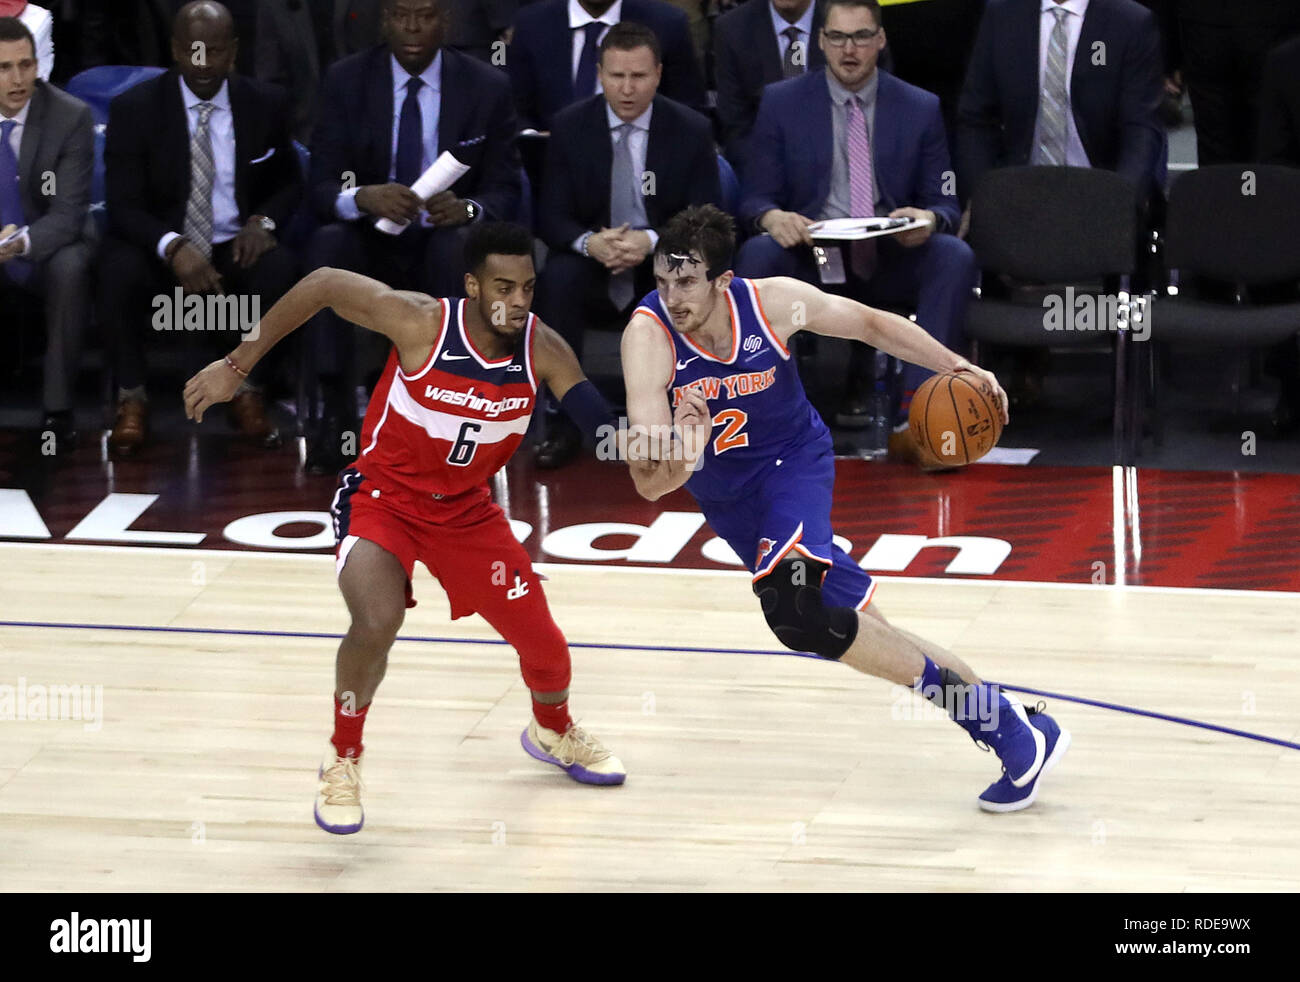 Washington Wizards' Troy Brown Jr (left) and Washington Wizards' John Wall battle for the ball during the NBA London Game 2019 at the O2 Arena, London. Stock Photo